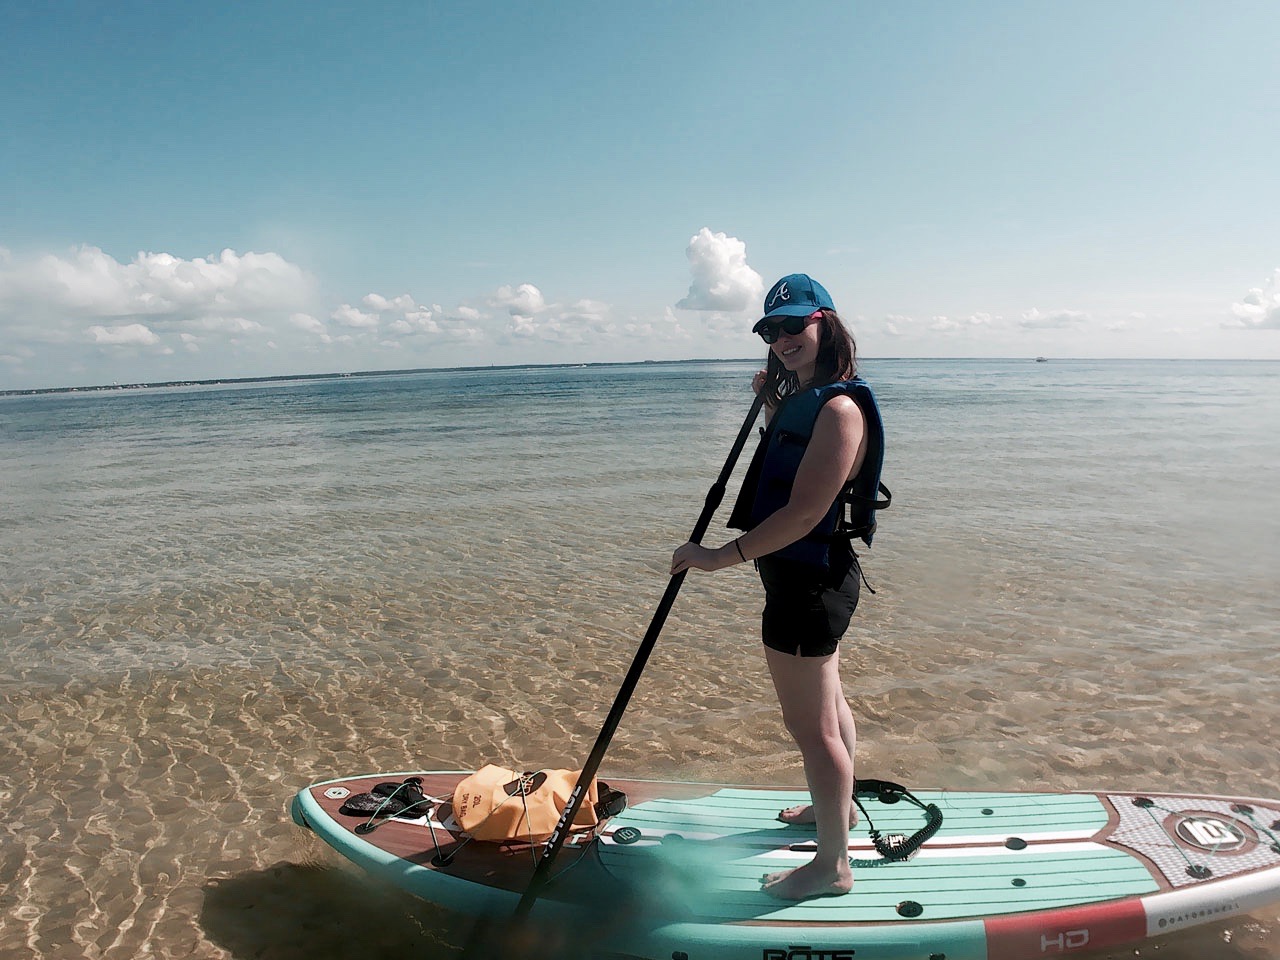 Alyssa stands on a SUP board and paddles in the gulf